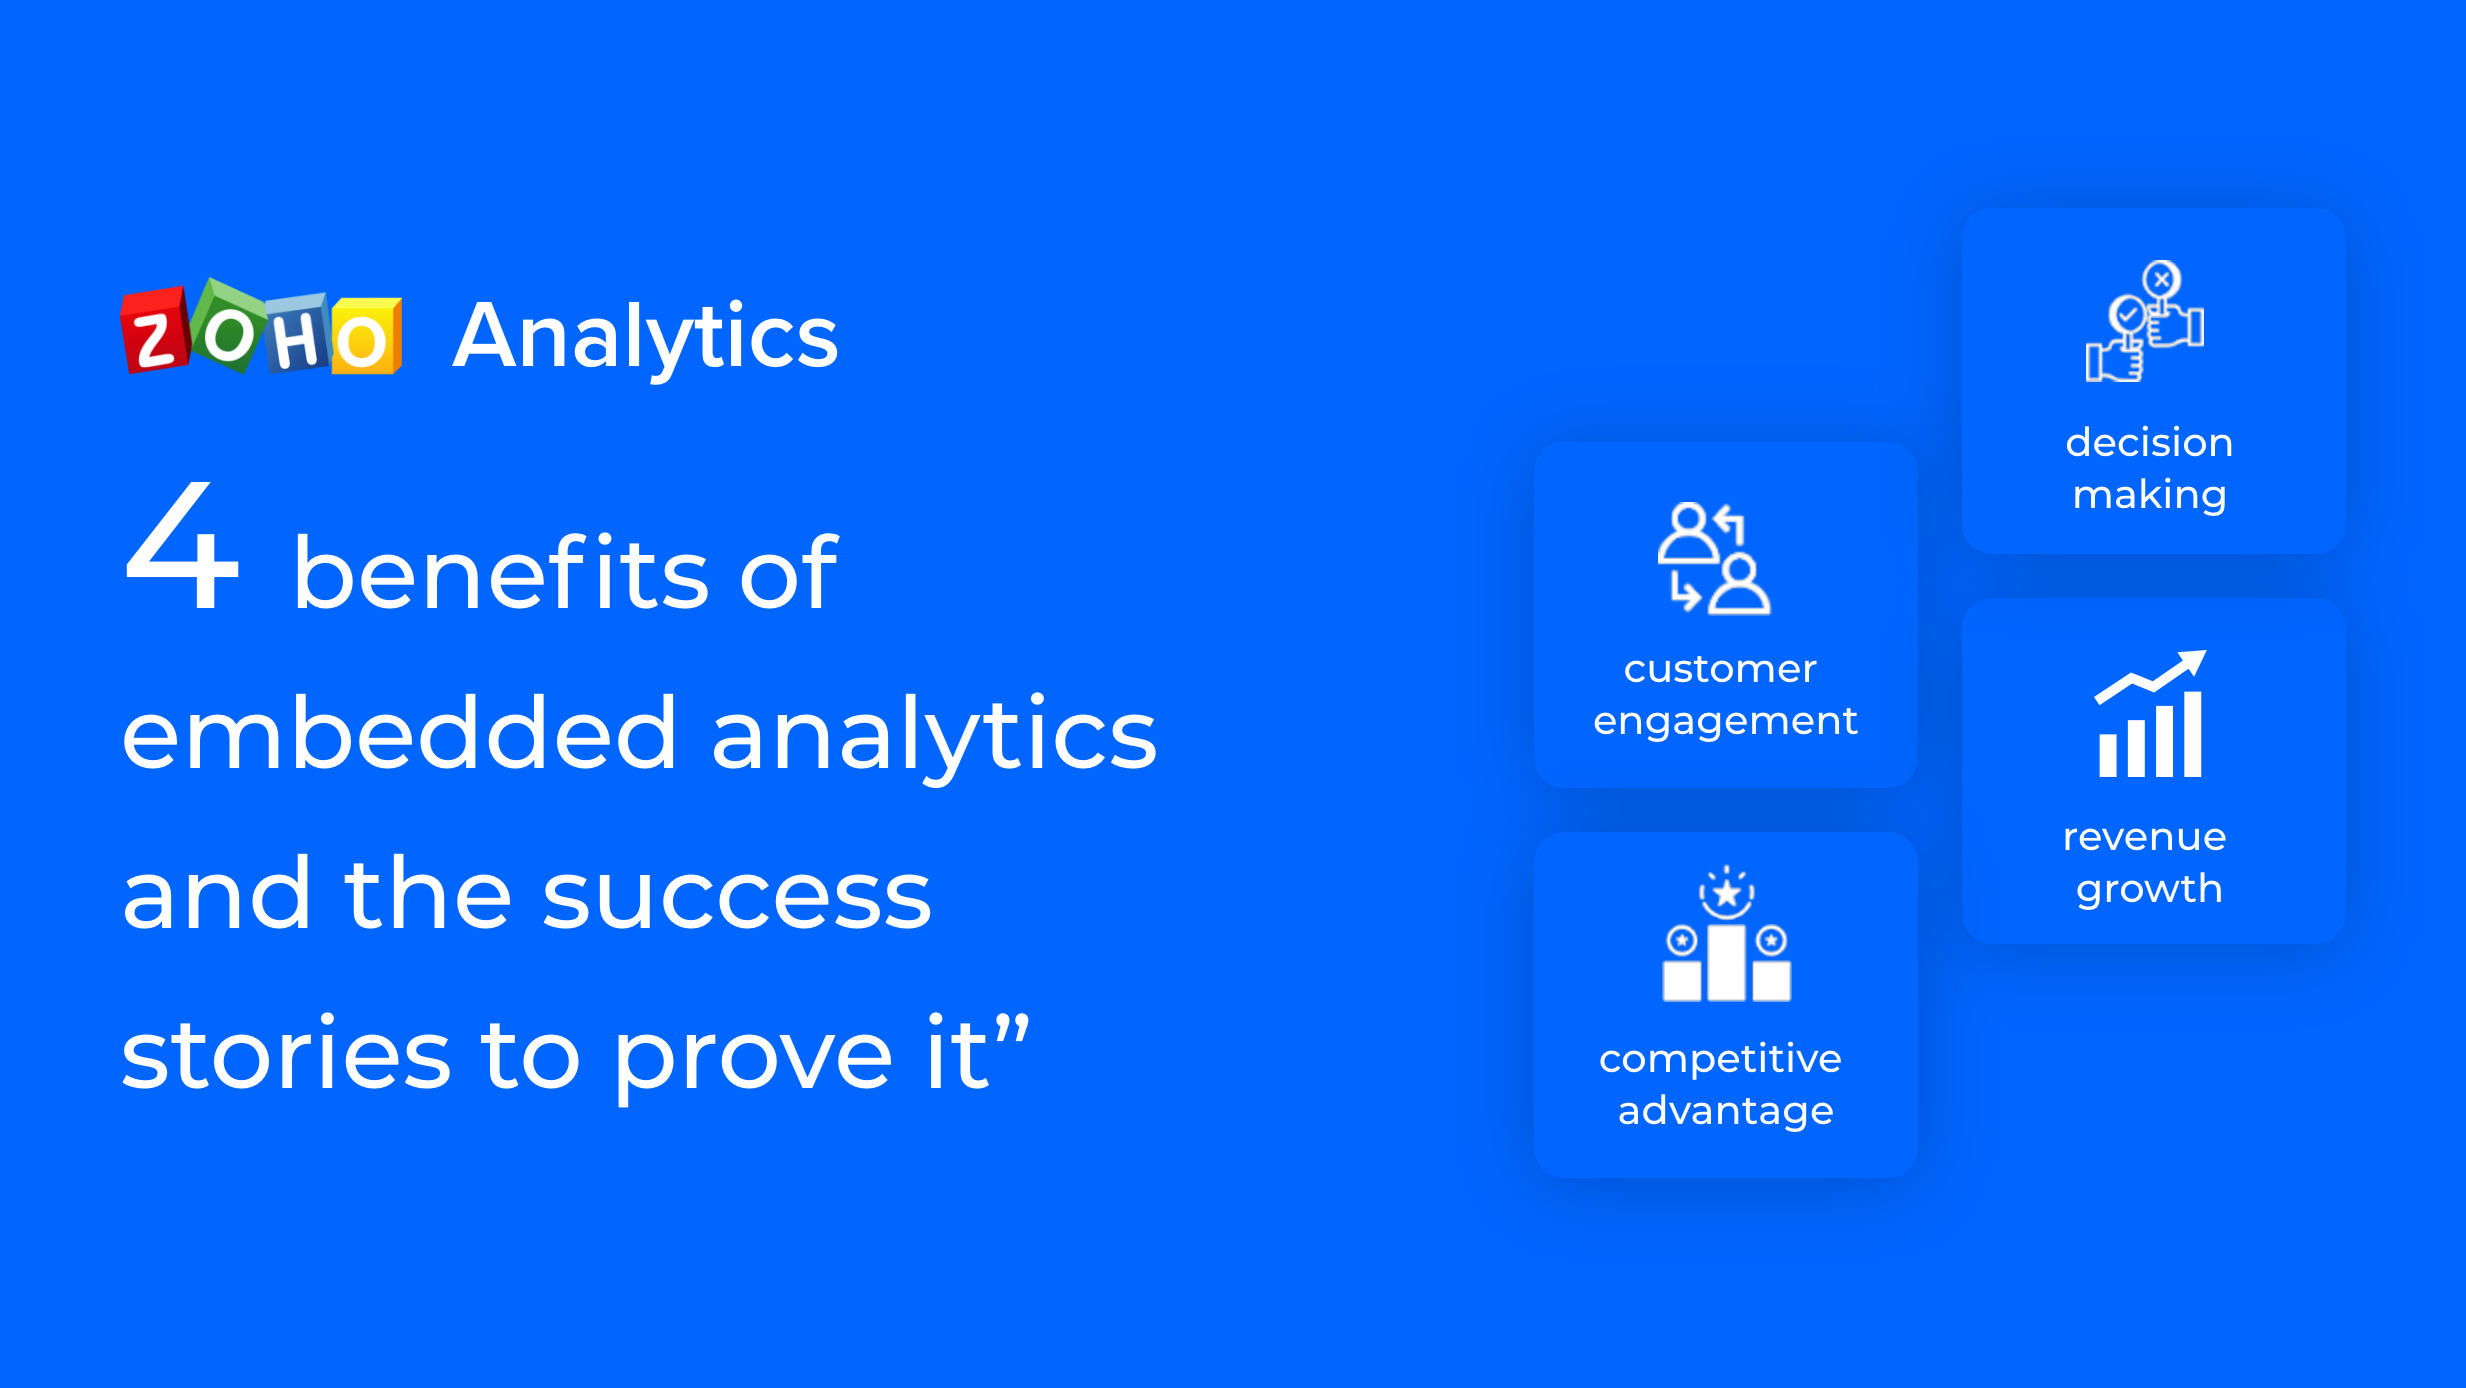 4 benefits of embedded analytics, and the success stories to prove it